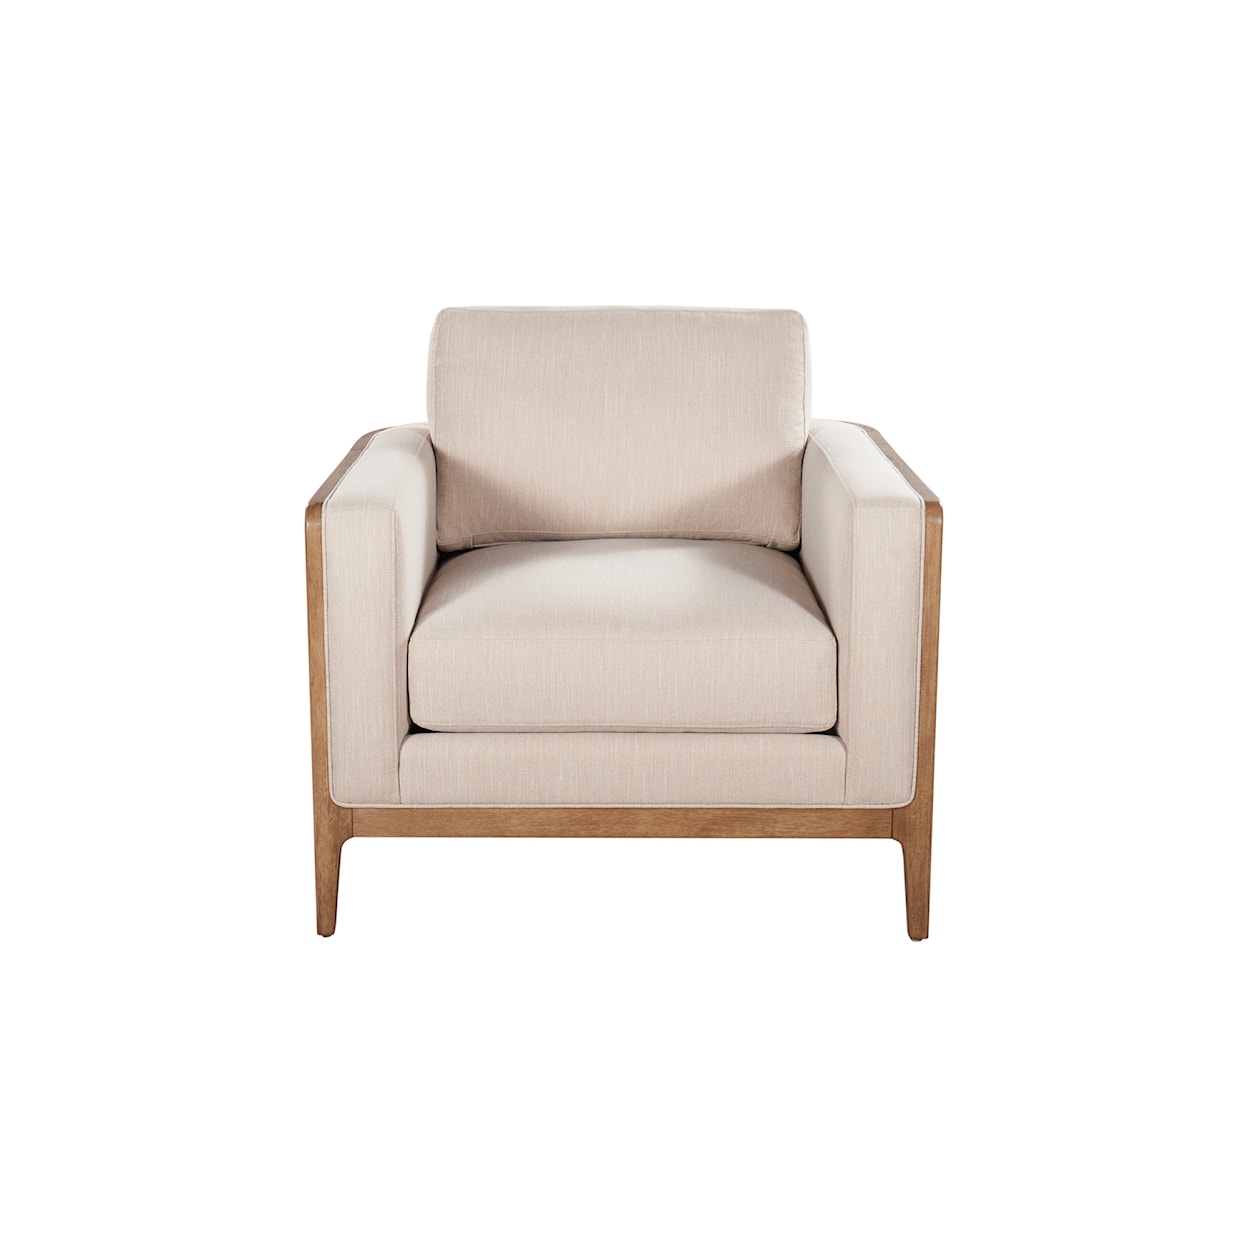 A.R.T. Furniture Inc Harvey Uph Lounge Chair